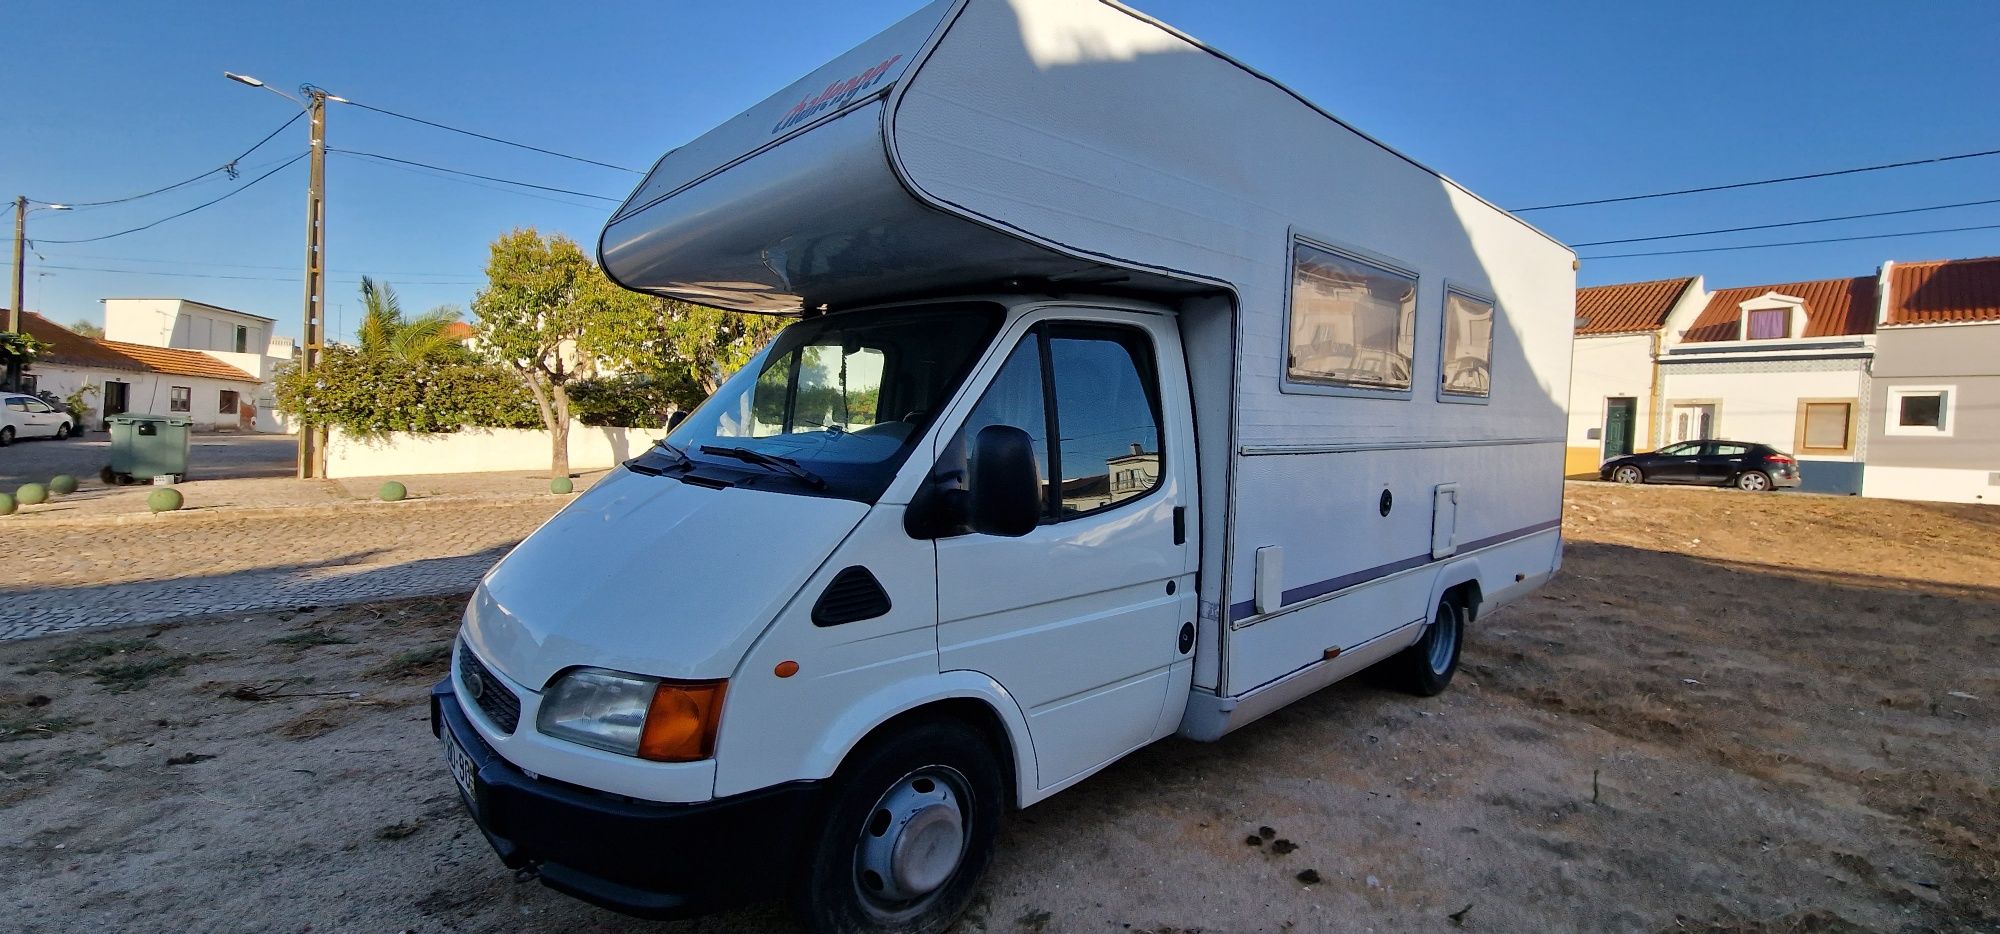 Autocaravana FORD - CHALLENGWR 1999